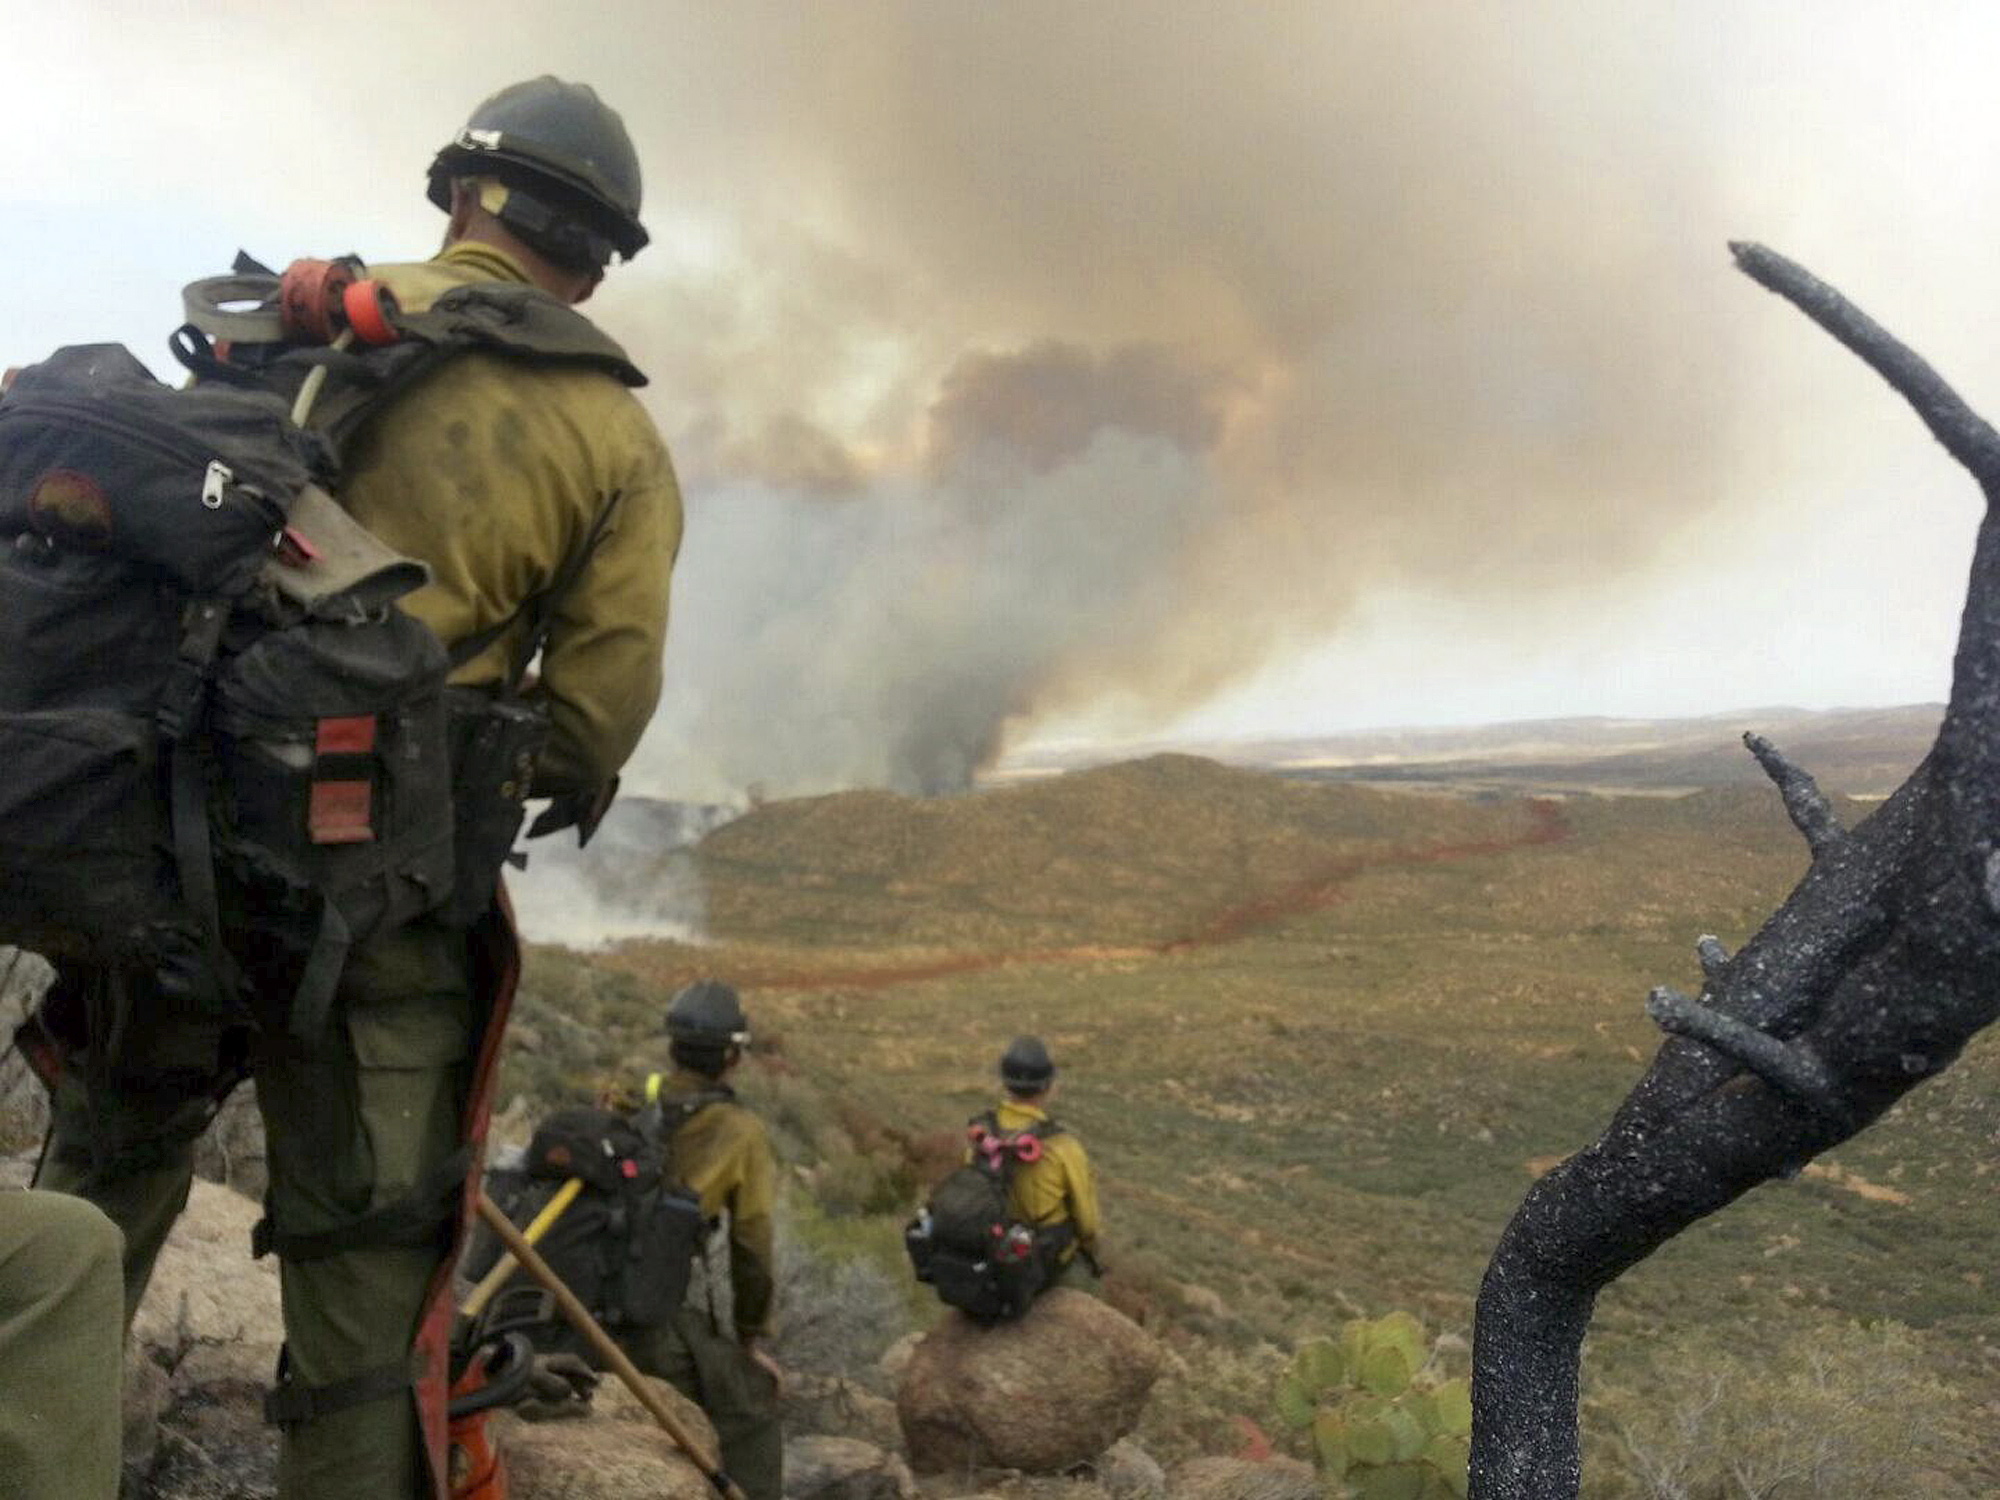 Courtesy of Juliann Ashcraft
In this photo shot by firefighter Andrew Ashcraft, members of the Granite Mountain Hotshots watch a growing wildfire during their lunch break June 30 near Yarnell, Ariz. Ashcraft texted the photo to his wife, Juliann, but died later that day battling the out-of-control blaze.